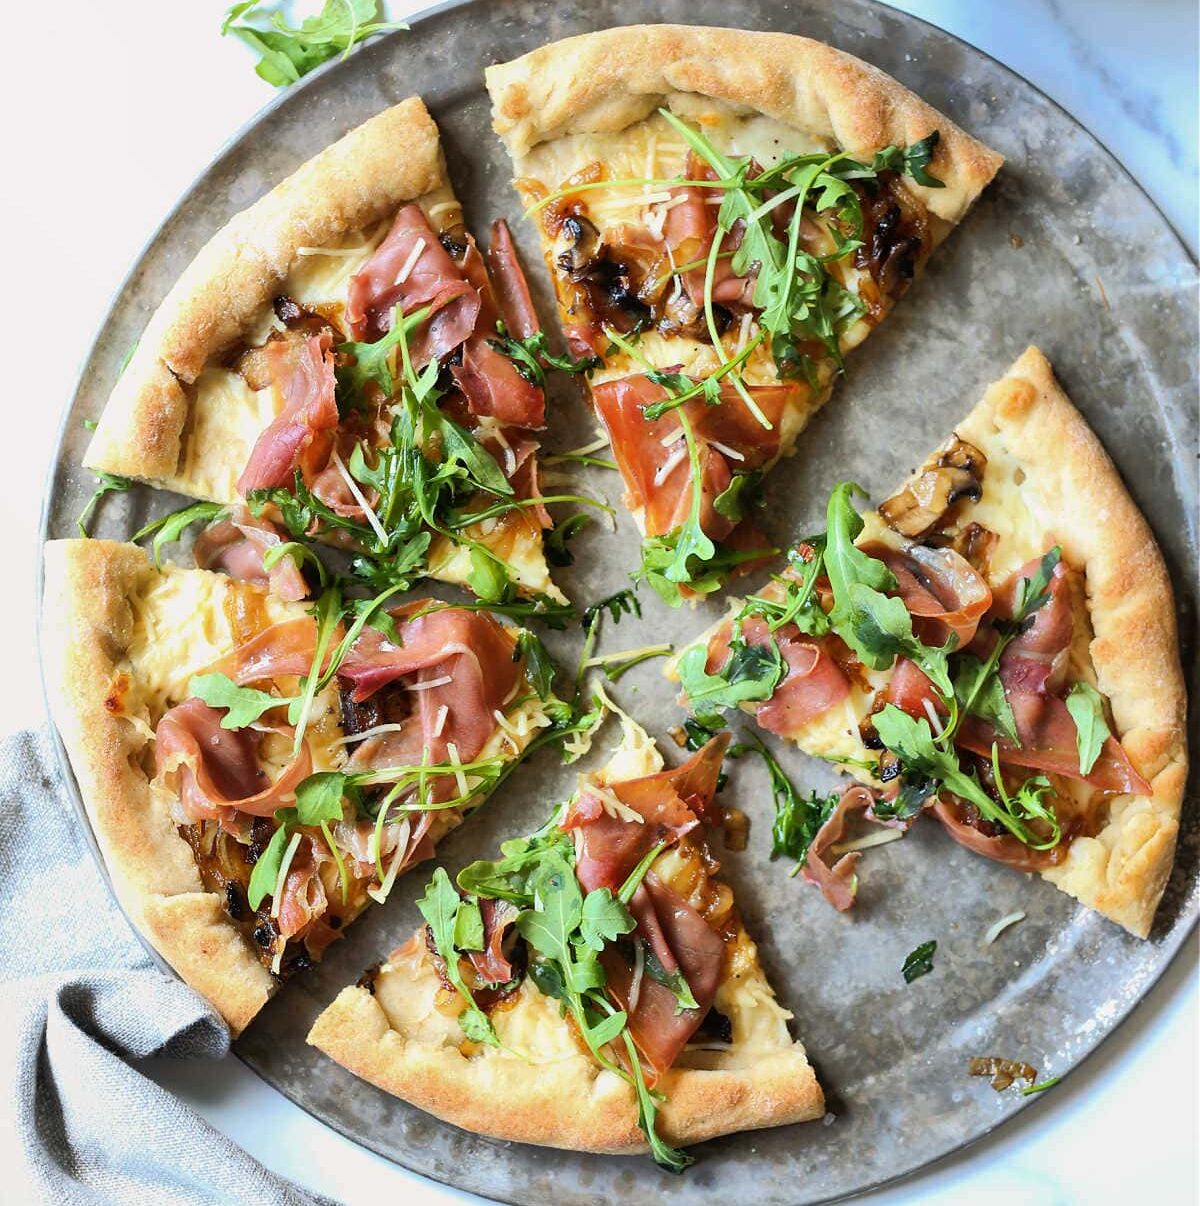 Arugula topped on a slice of gluten free pizza with prosciutto and caramel onion.